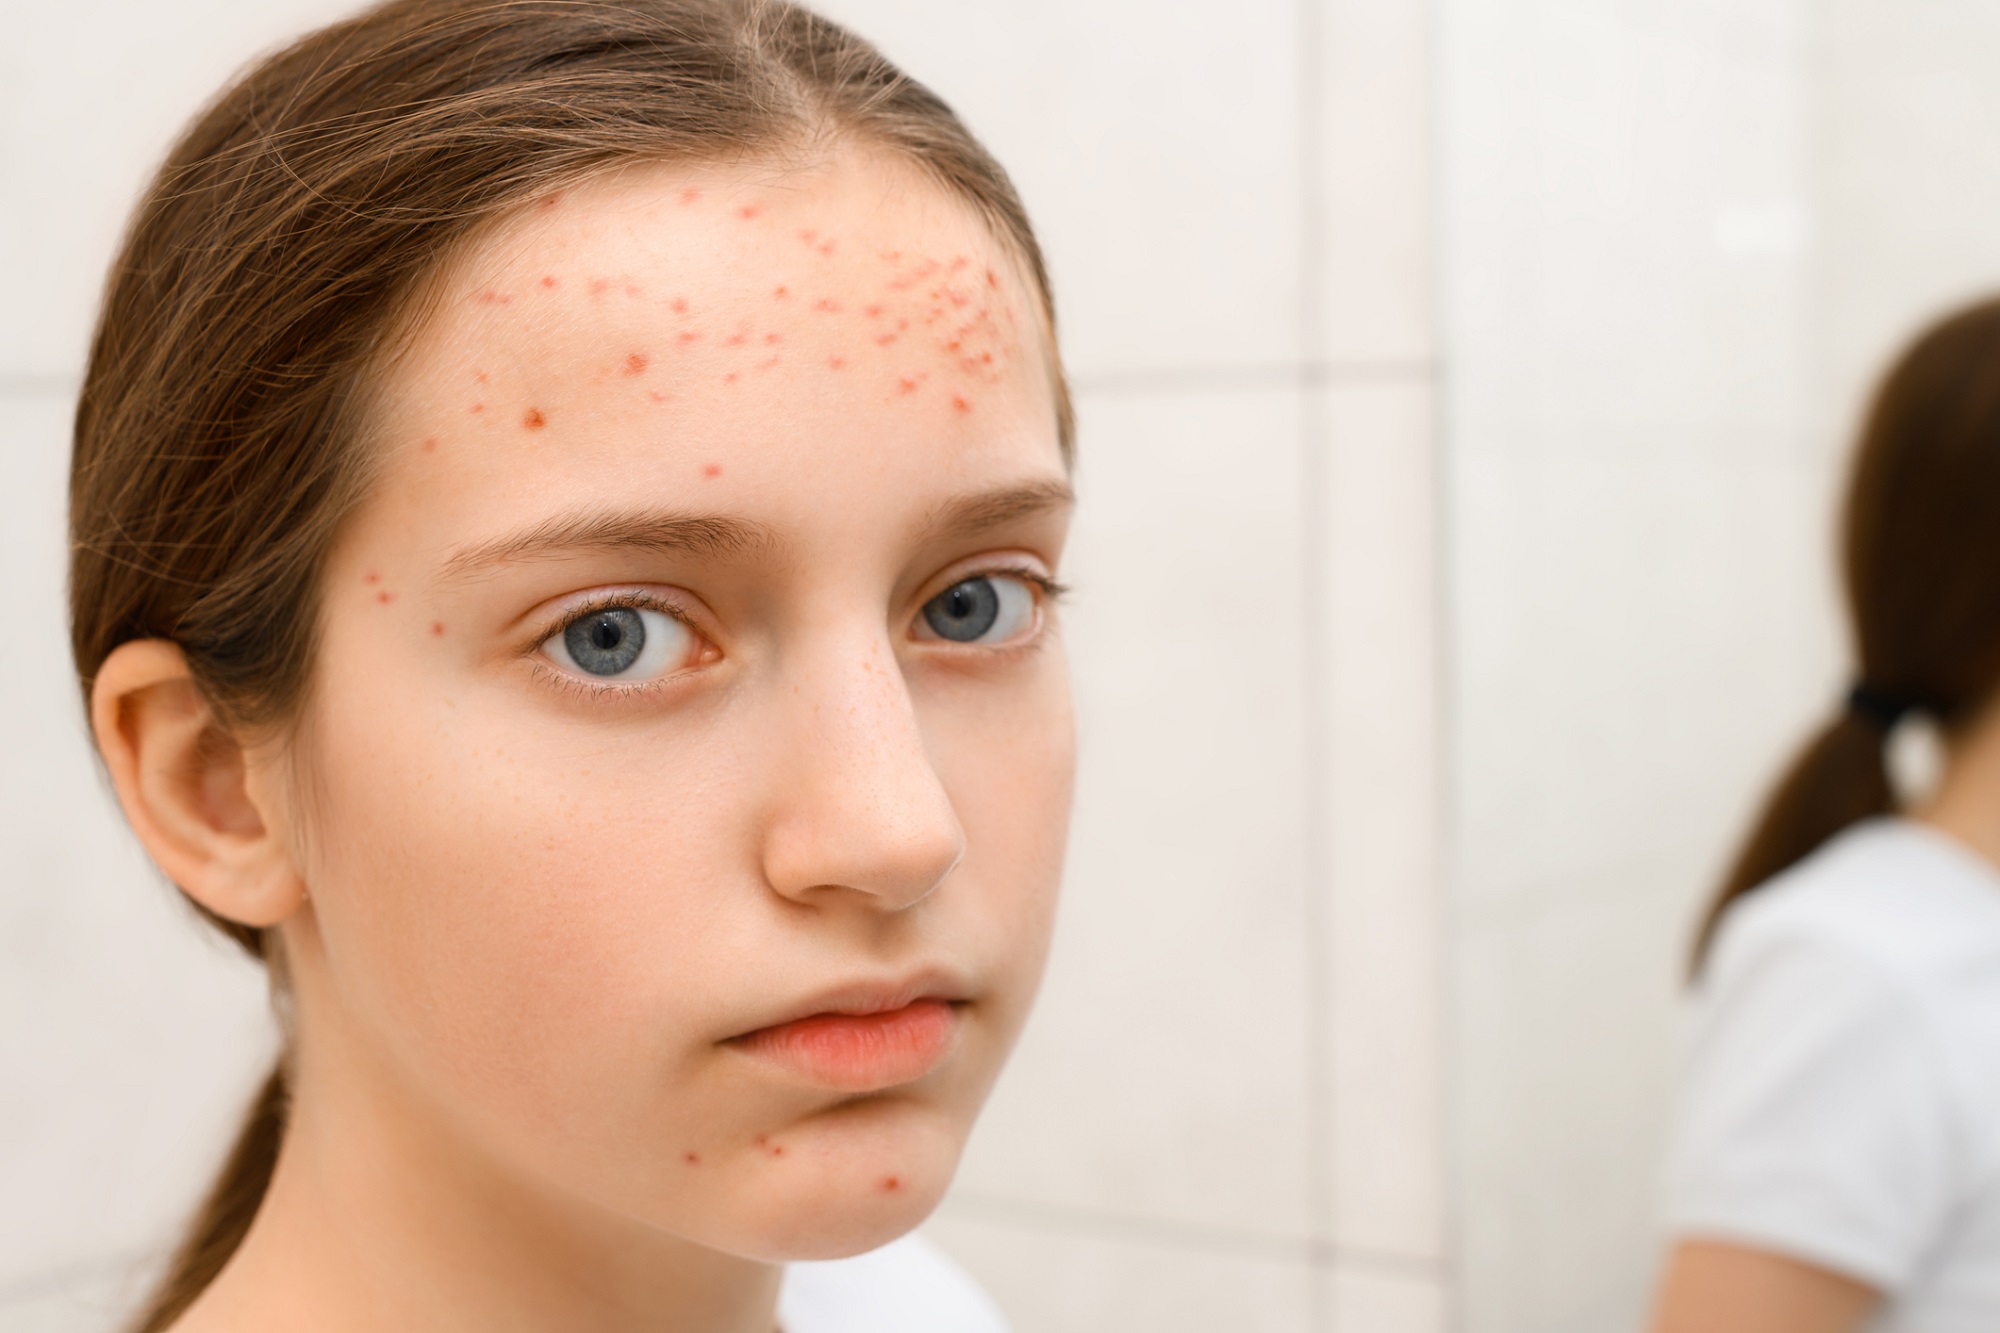 Parents of adolescents say acne is top skin concern for their child CeraVe survey